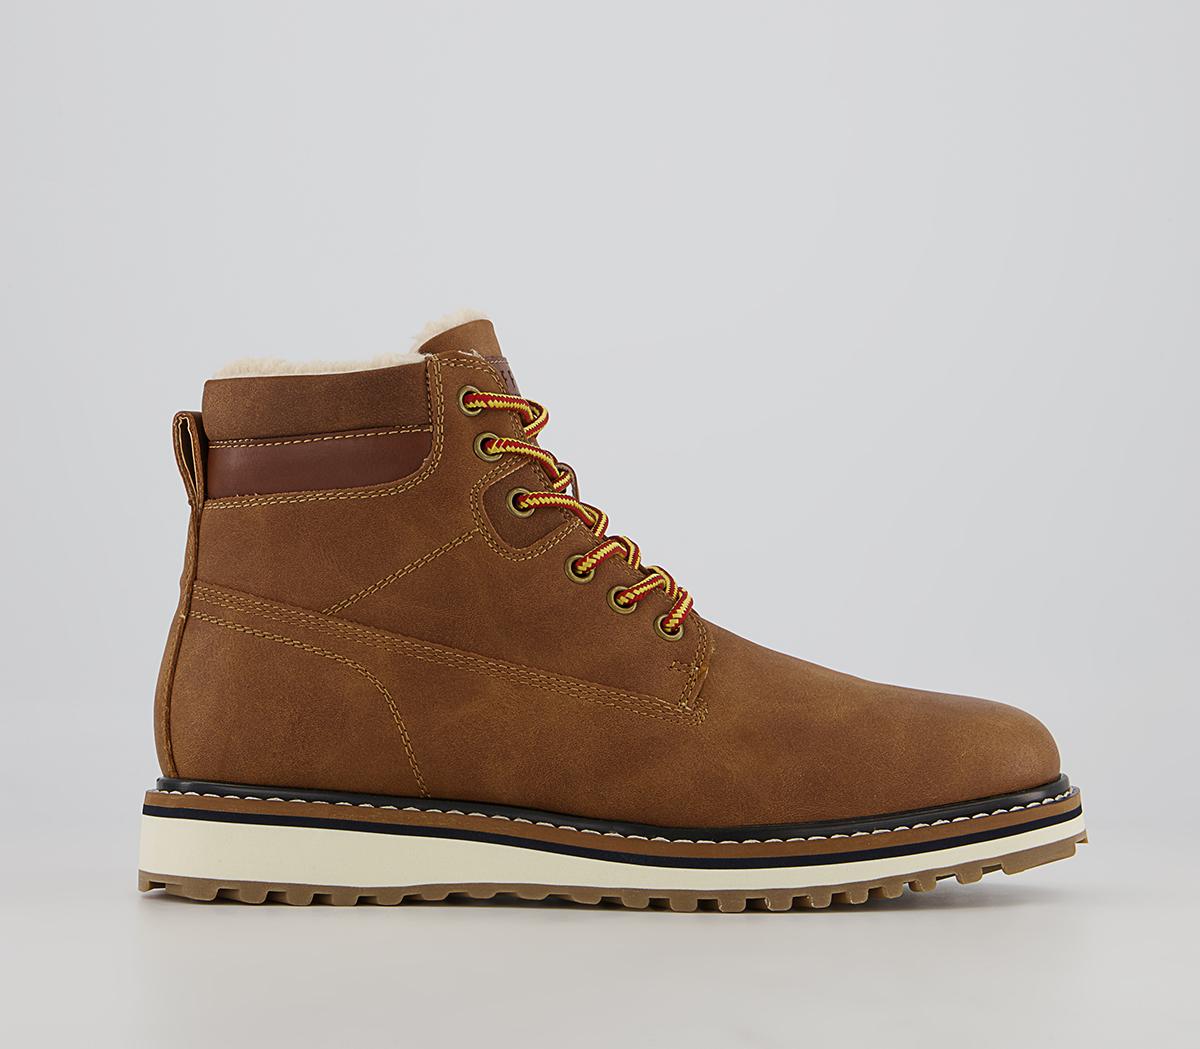 OFFICEBodmin Borg Lined Ankle BootsTan Nubuck